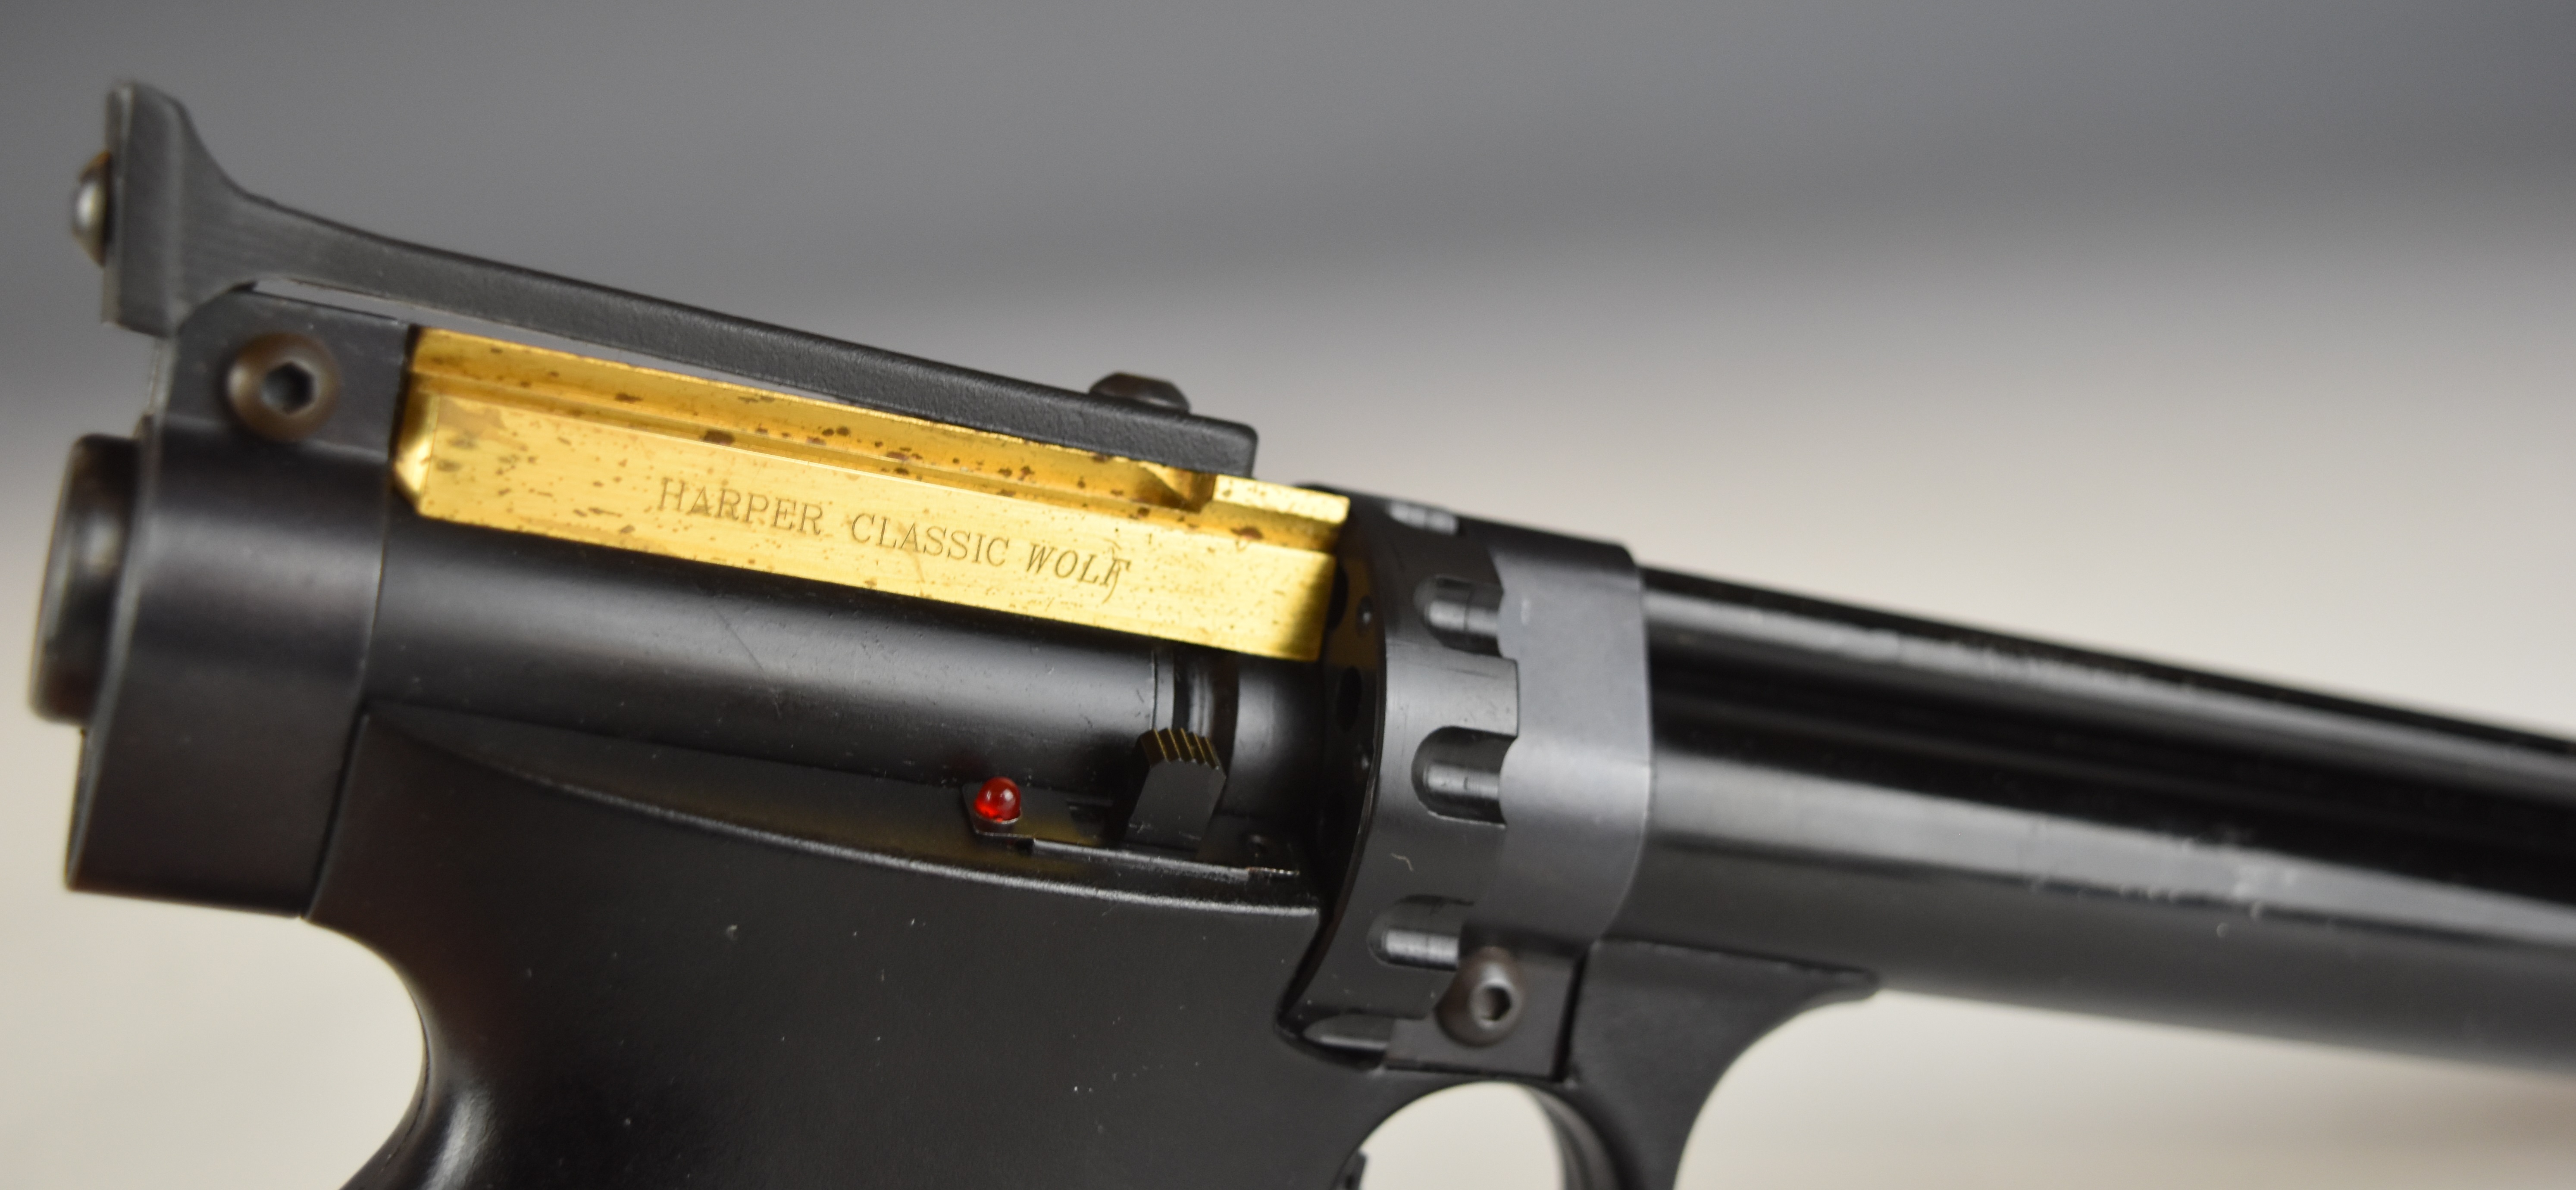 Harper Classic Wolf .177 PCP air rifle with 10-shot rotary magazine, brass plaque inset to the stock - Image 7 of 11